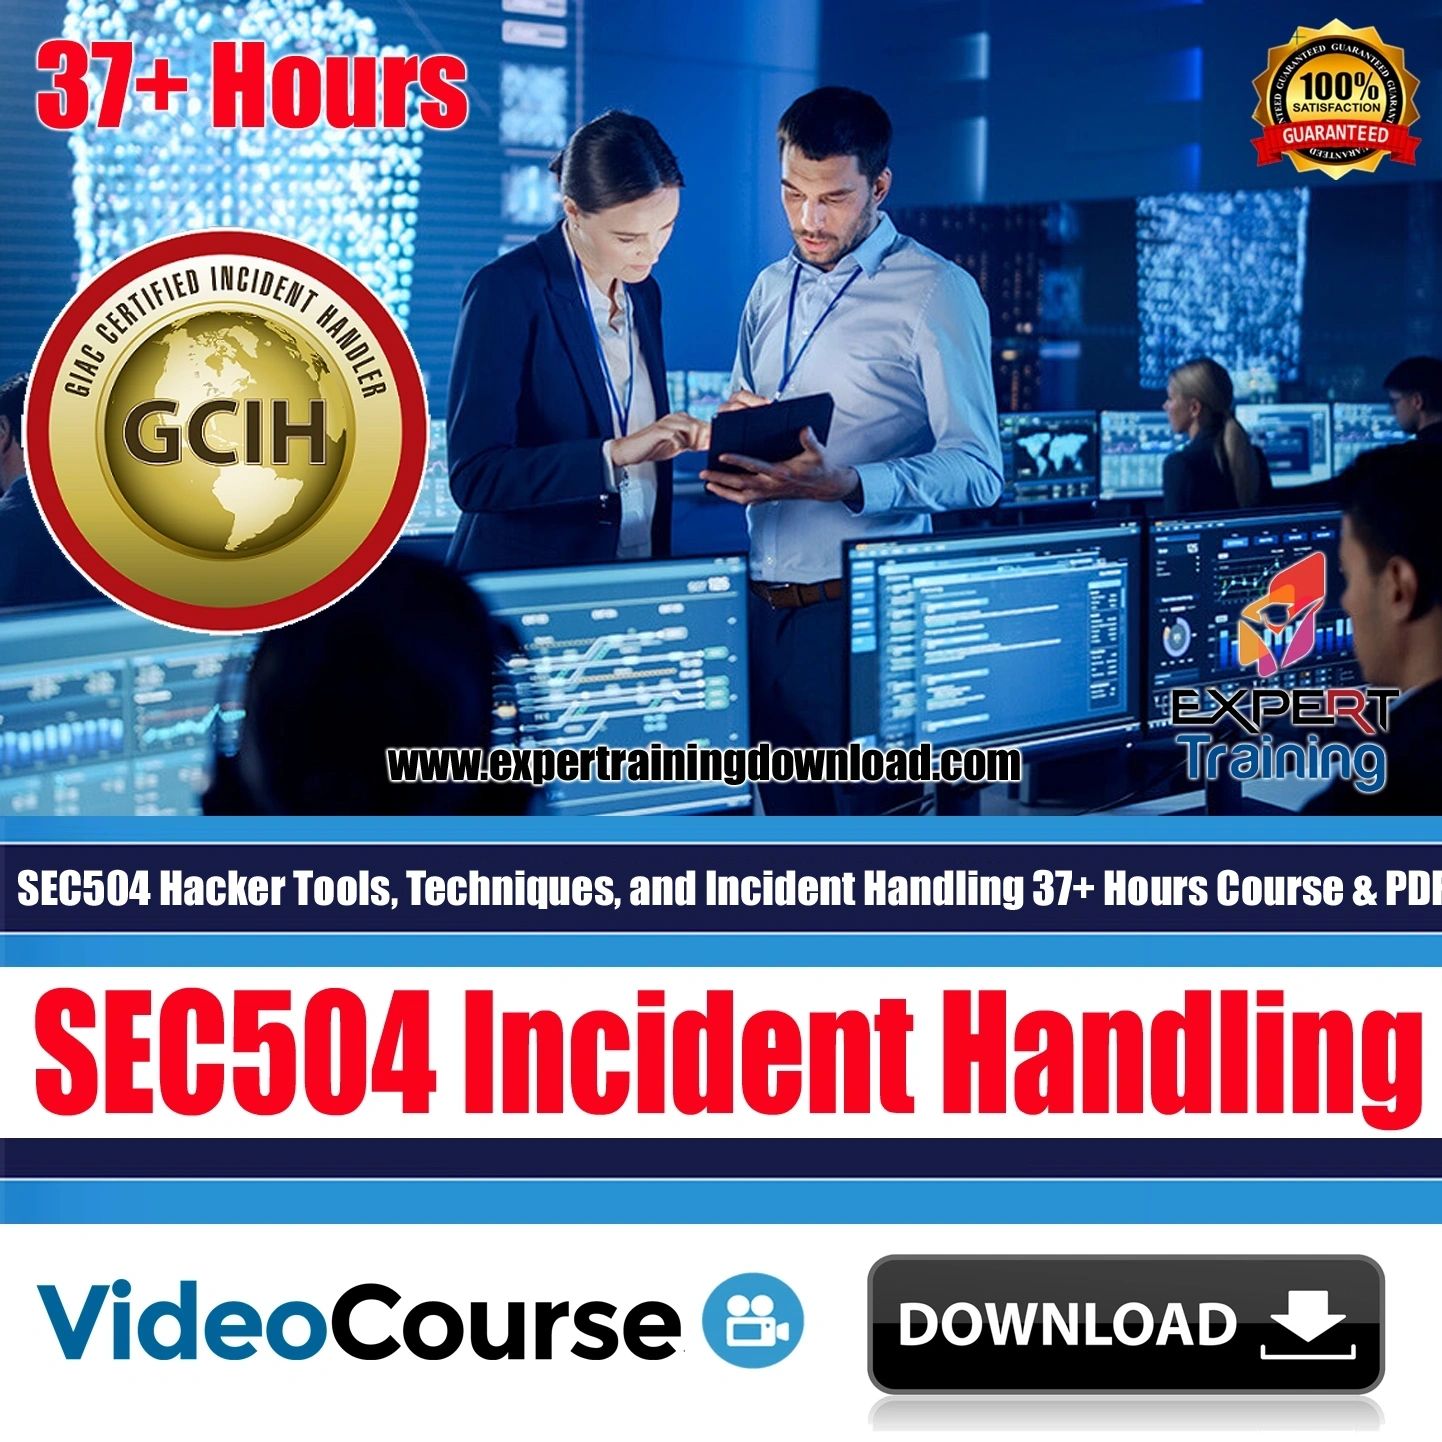 SEC504 Hacker Tools, Techniques, and Incident Handling 37+ Hours Course & PDF Guides